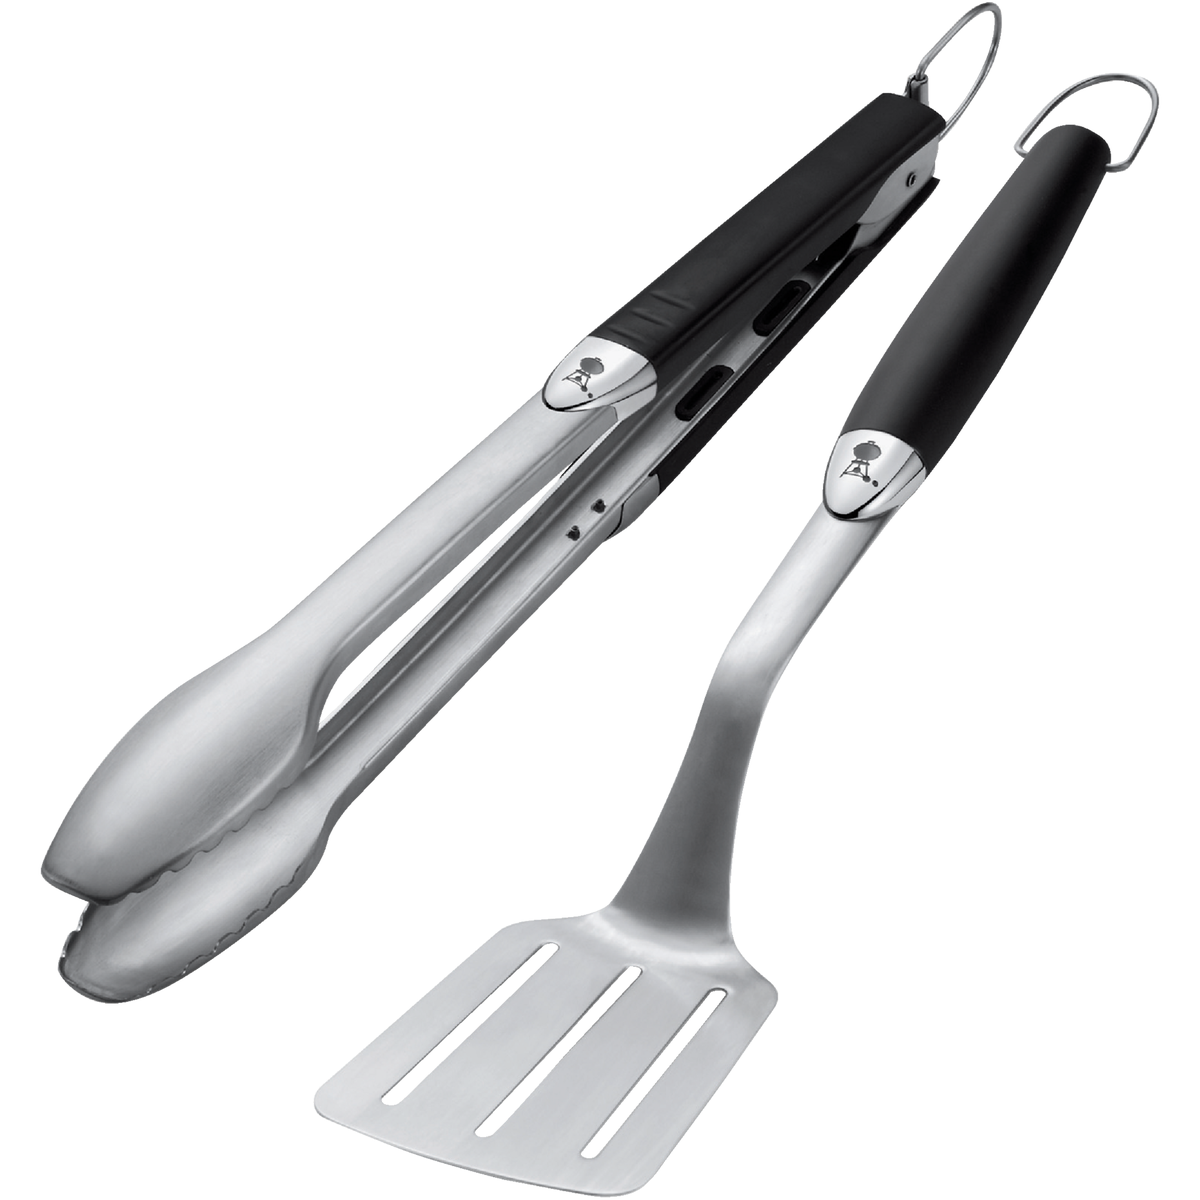 Weber Soft Touch Stainless Steel 2-Piece Barbeque Tool Set 6625 - 1 Each Weber 2-piece Stainless Steel Grill Tool Set